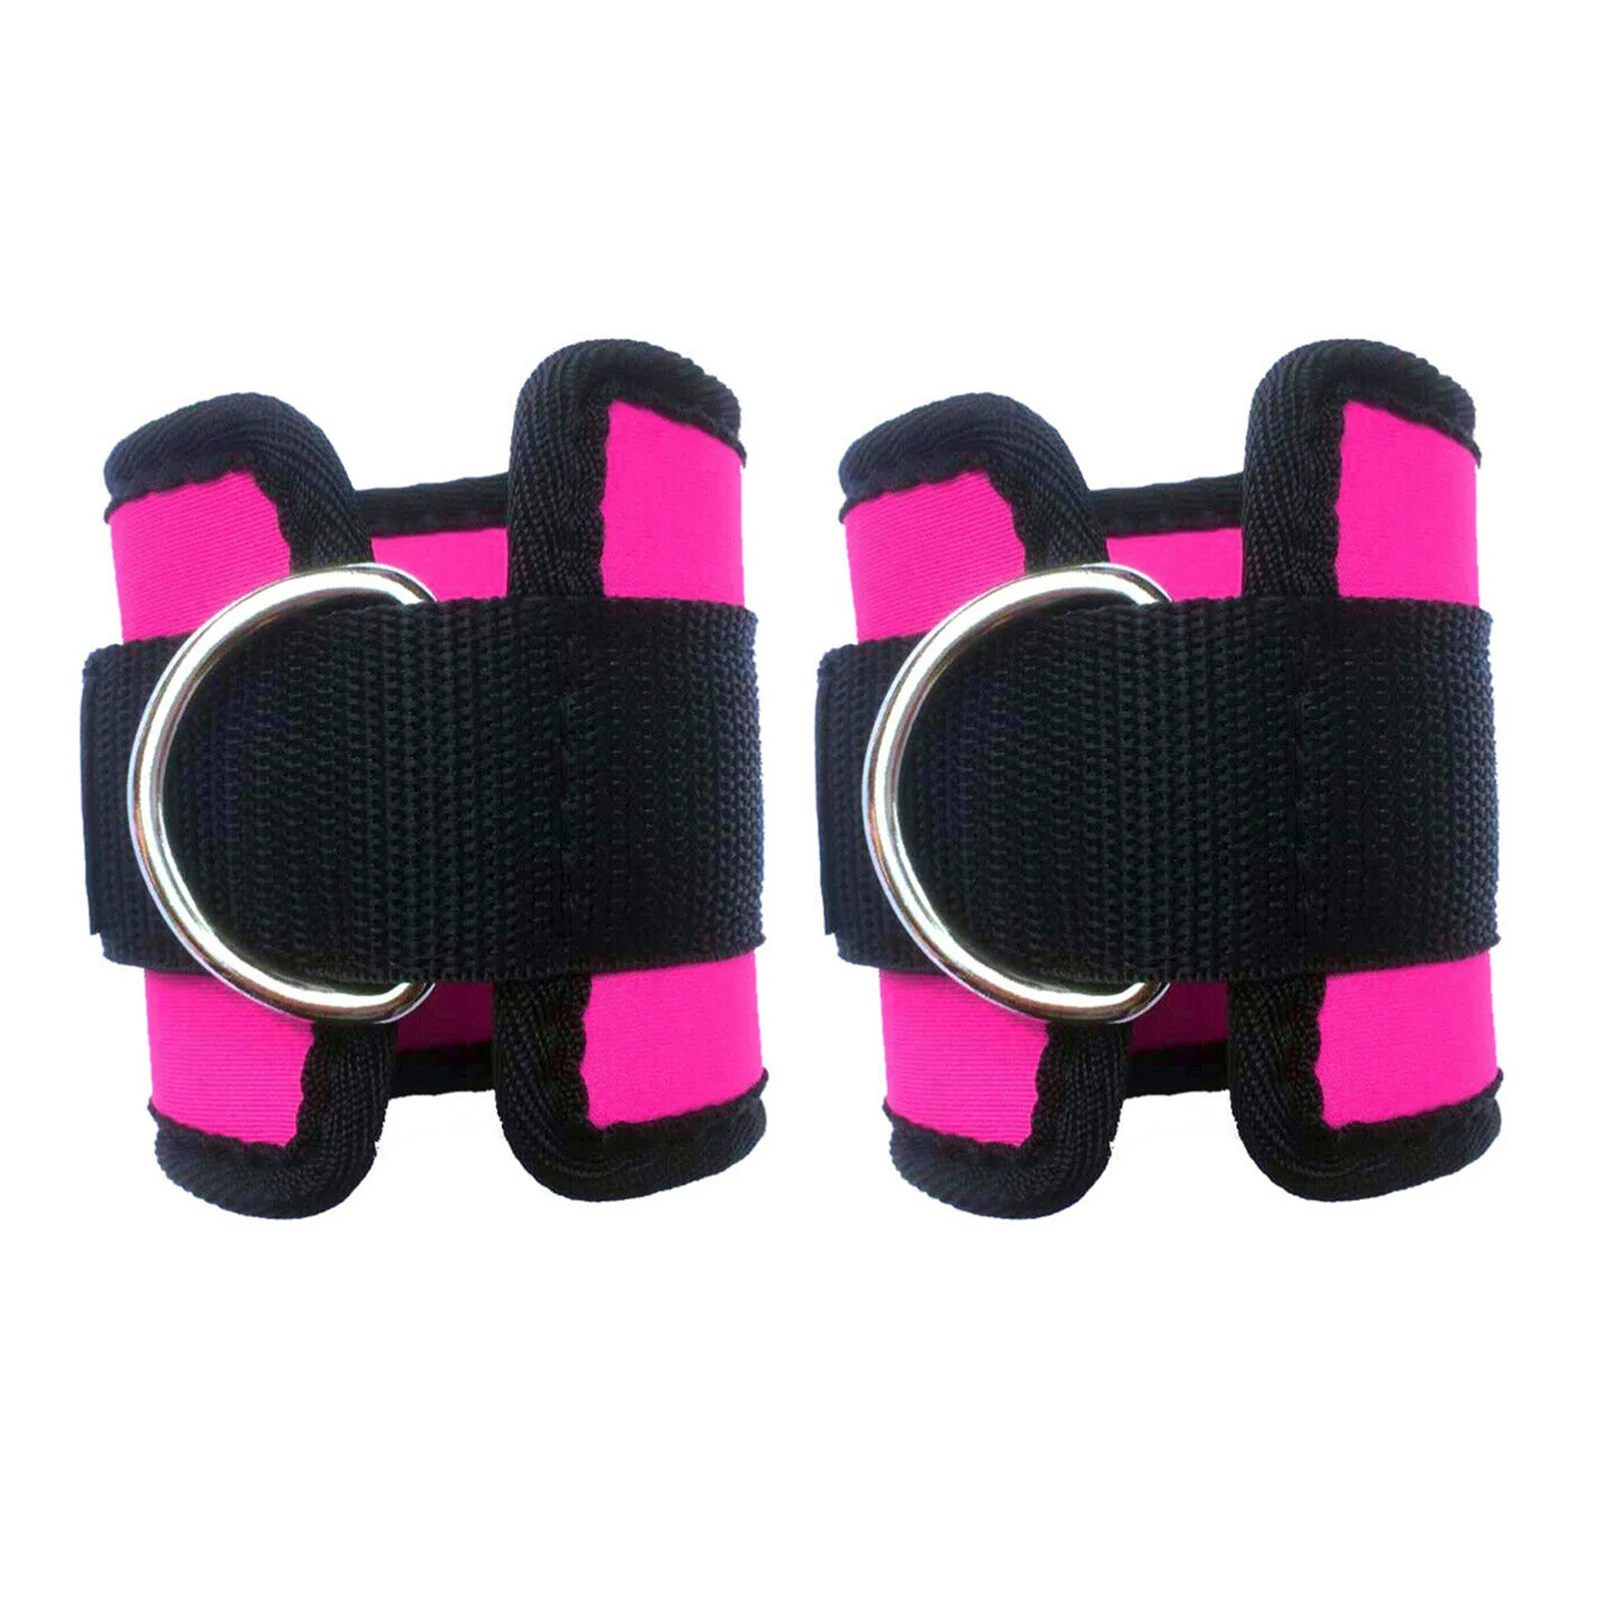 

2pcs Ankle Weights Adjustable Leg Wrist Strap Running Boxing Braclets Straps Gym Accessory CMG786